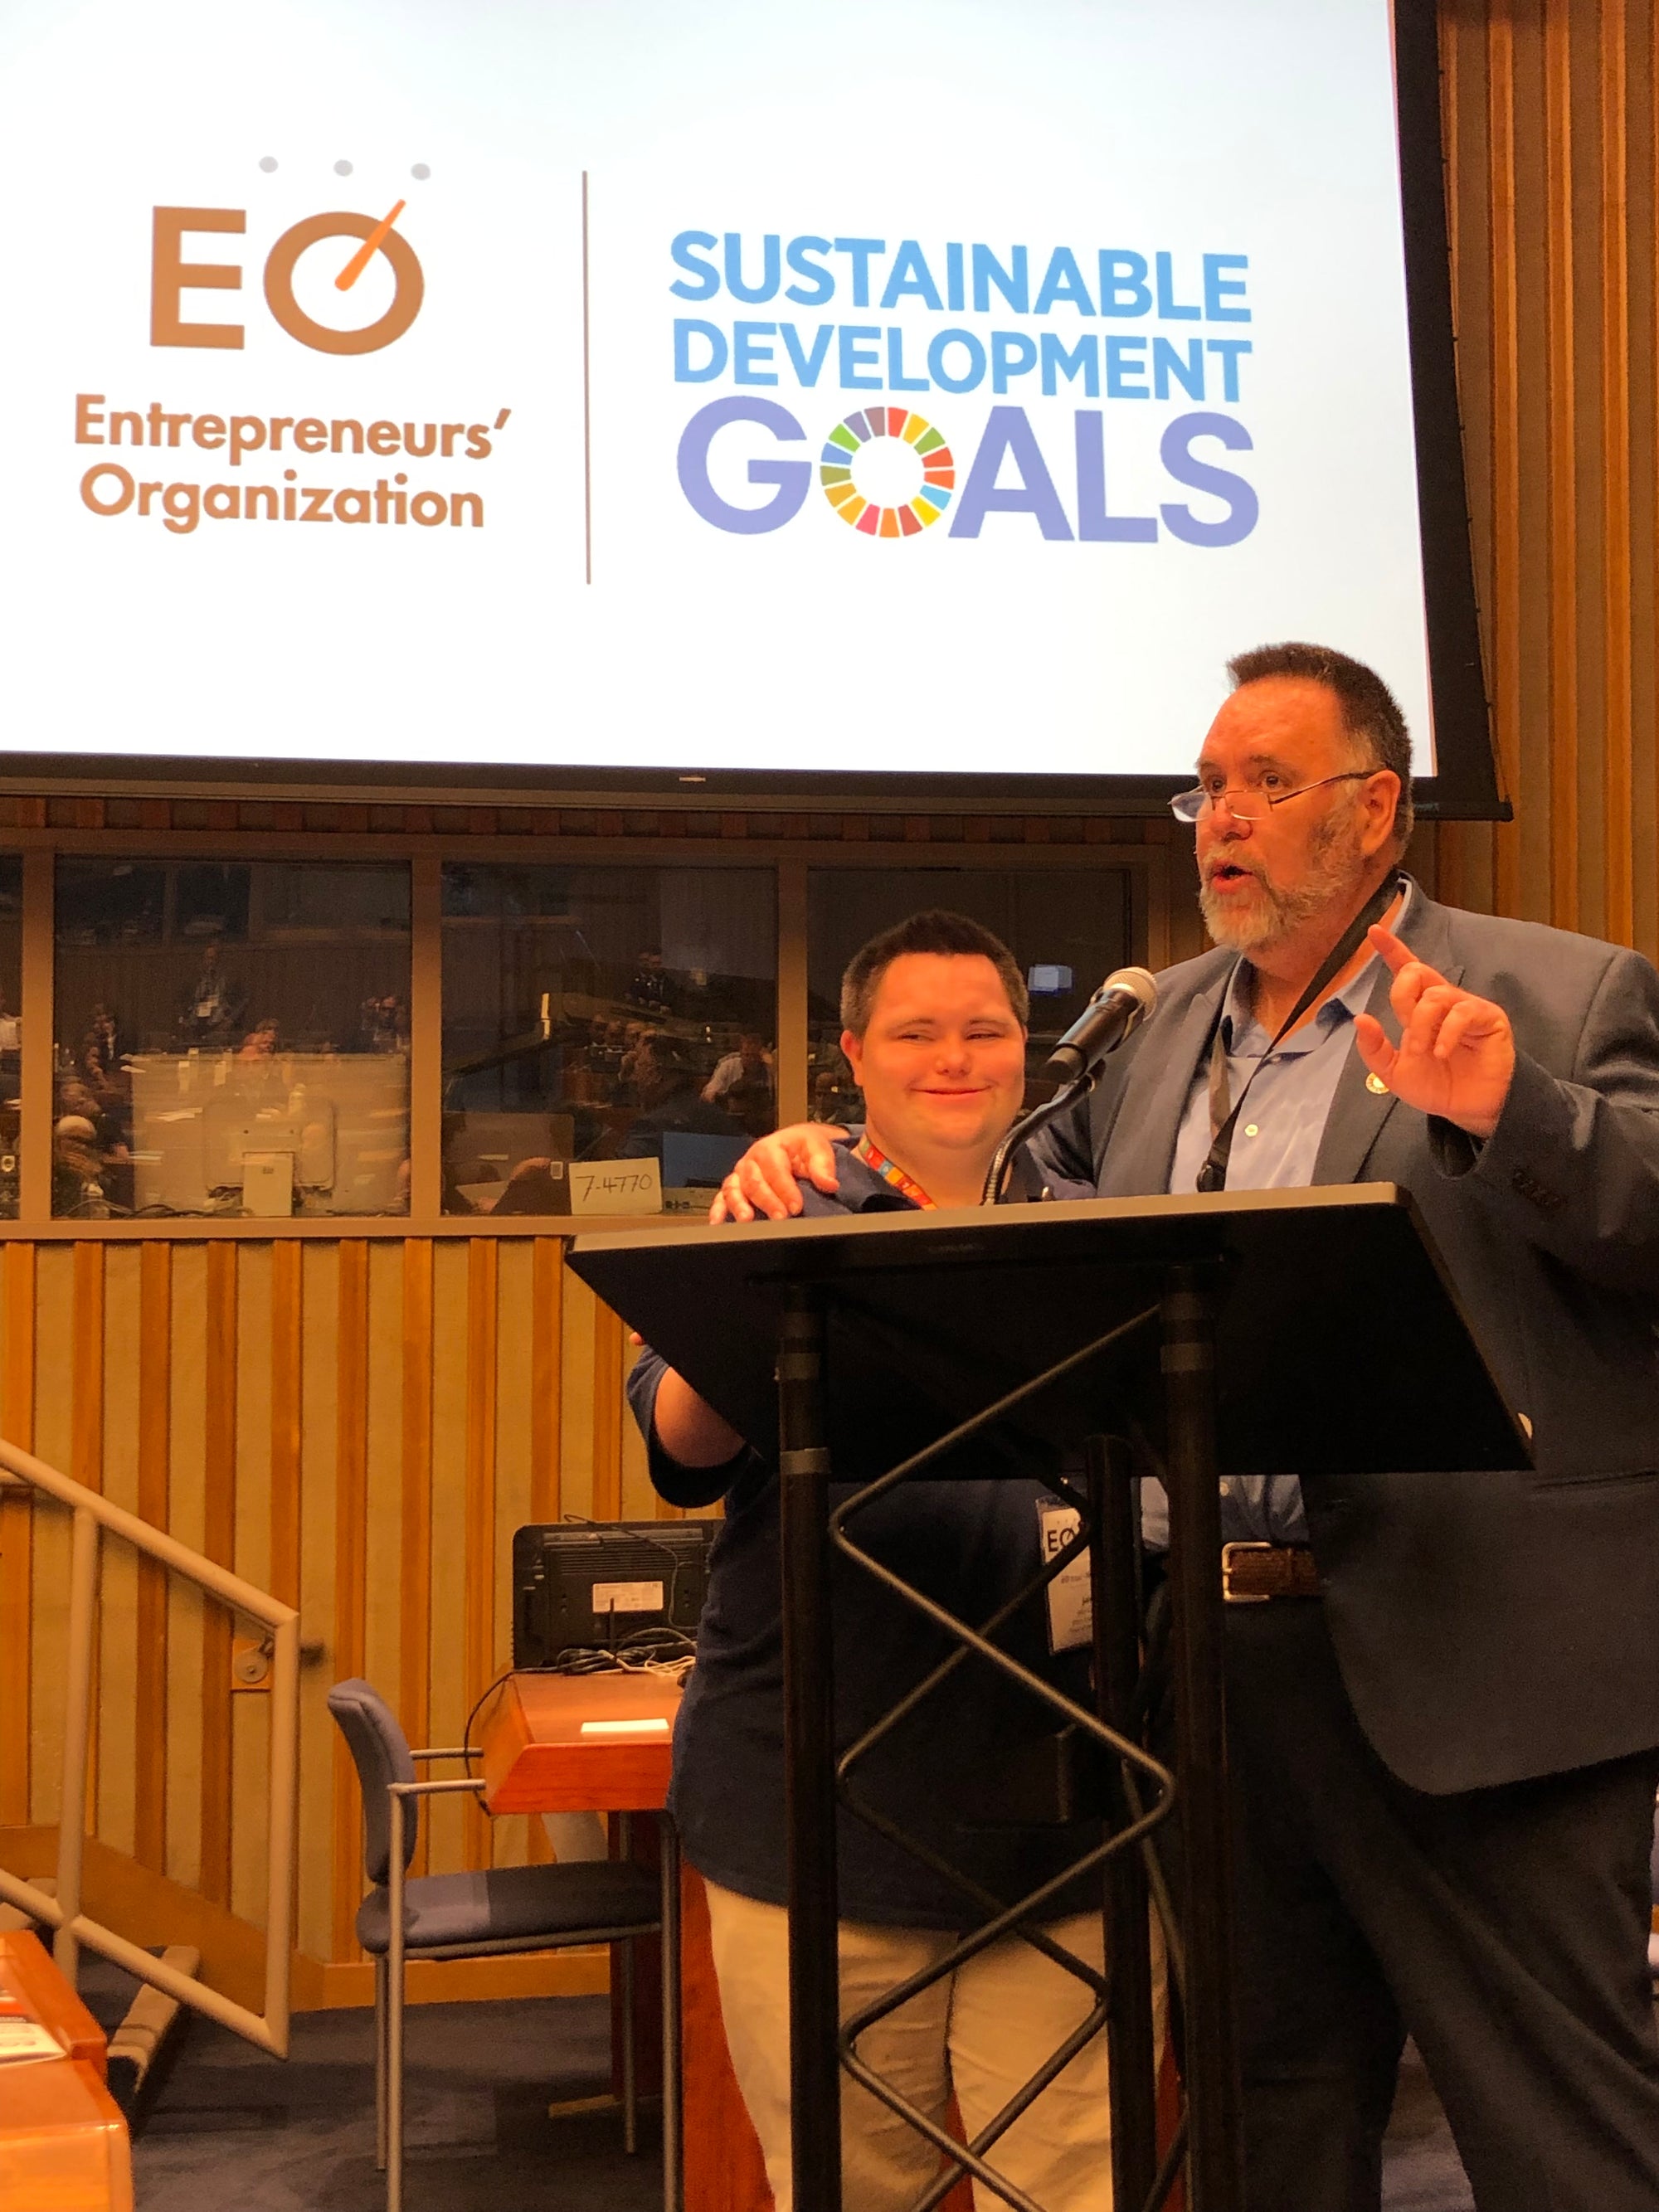 John’s Crazy Socks Supports the United Nations Sustainable Development Goals